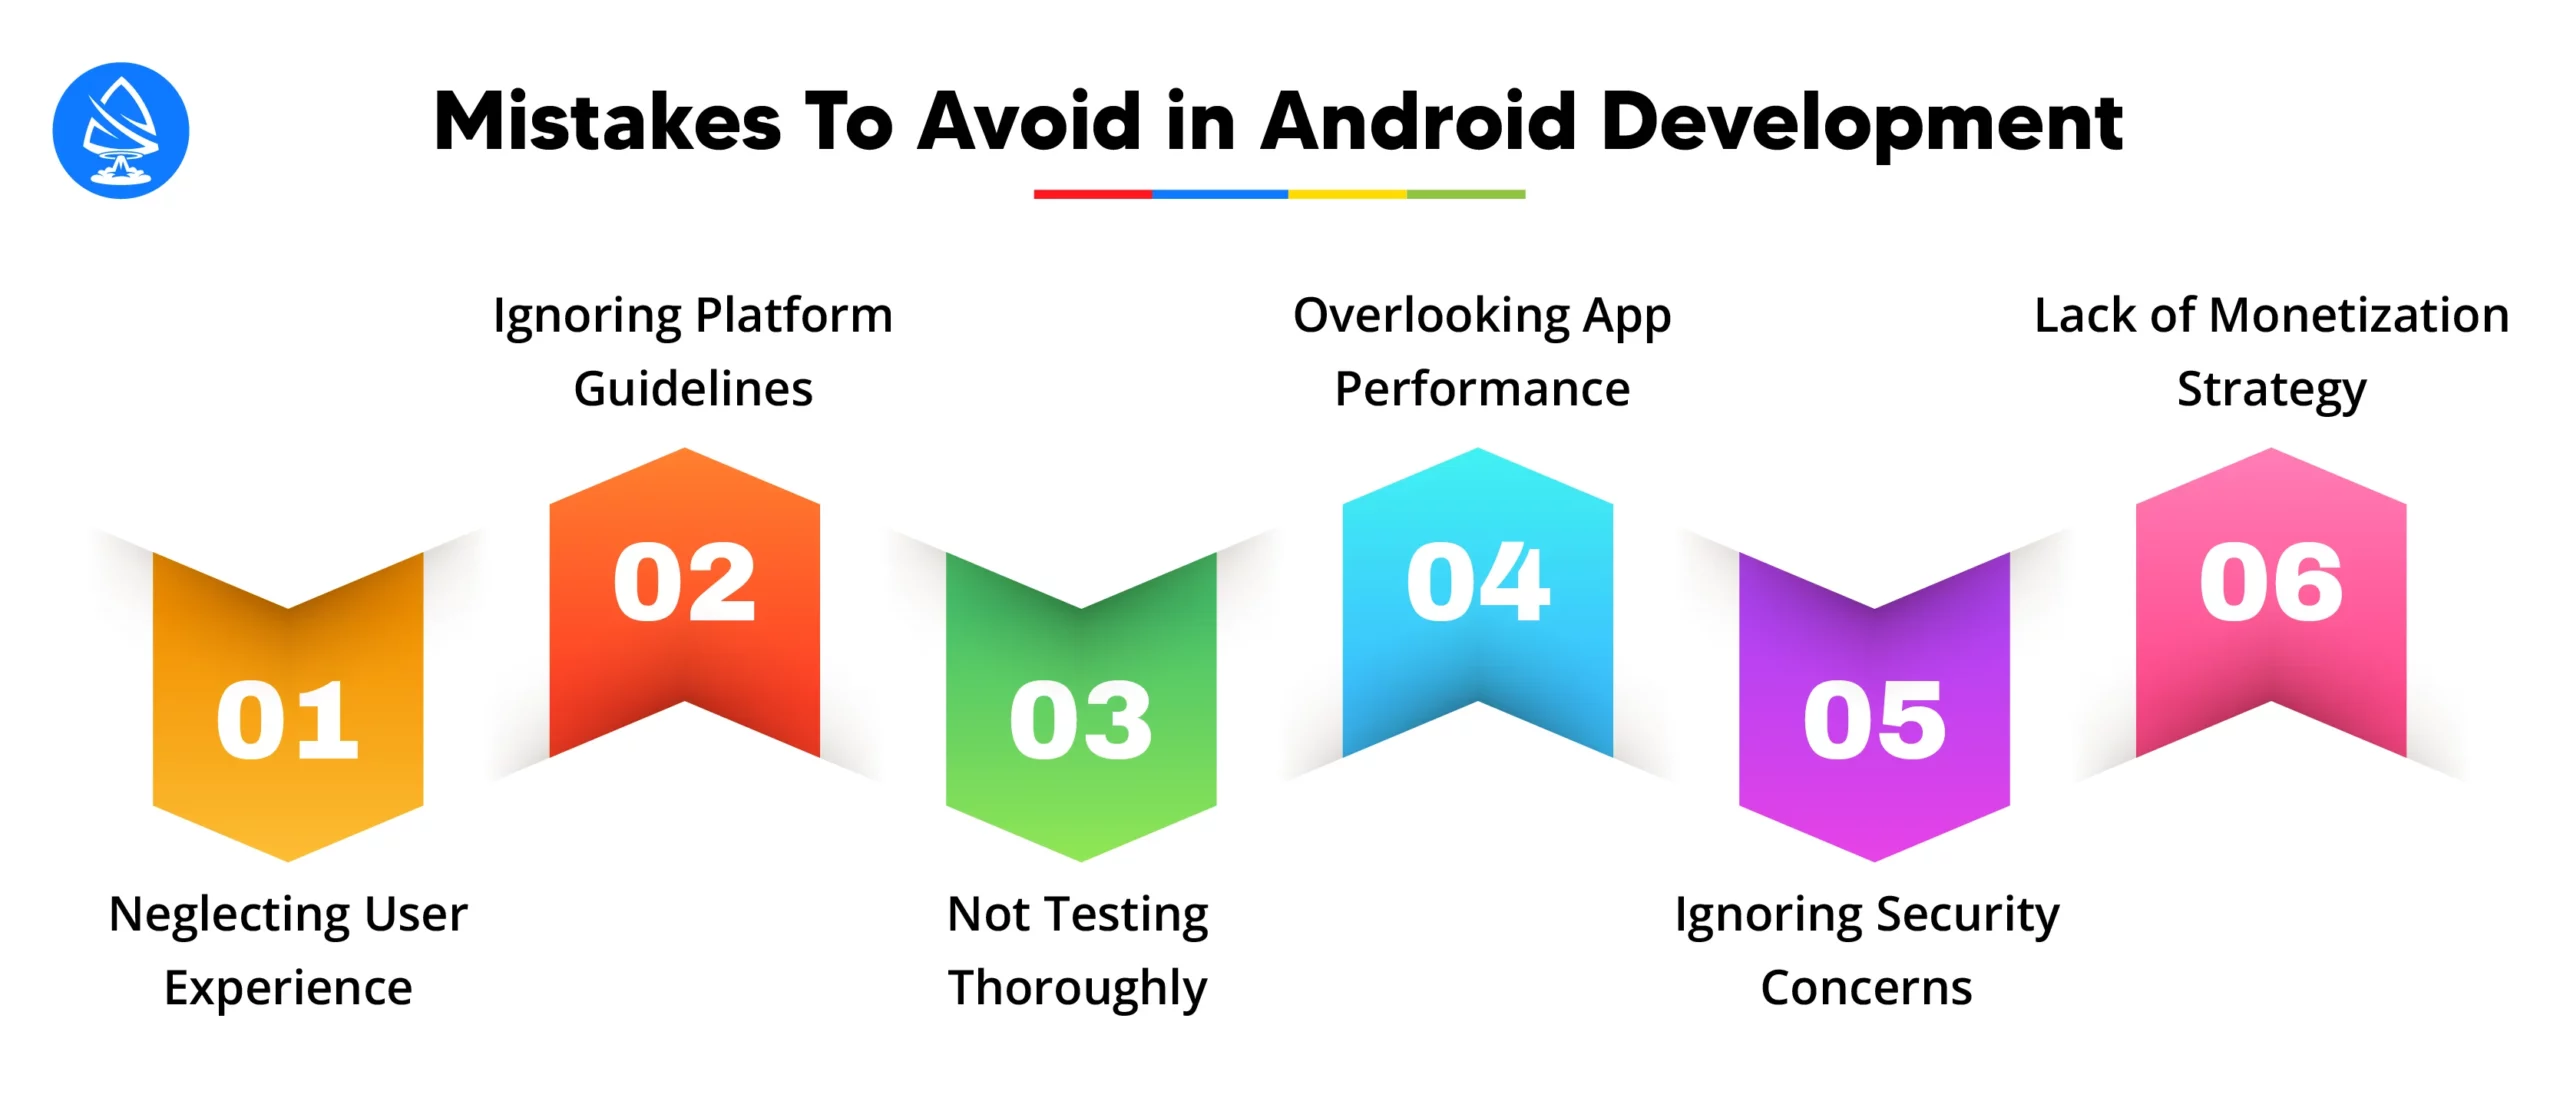 Mistakes To Avoid in Android Development